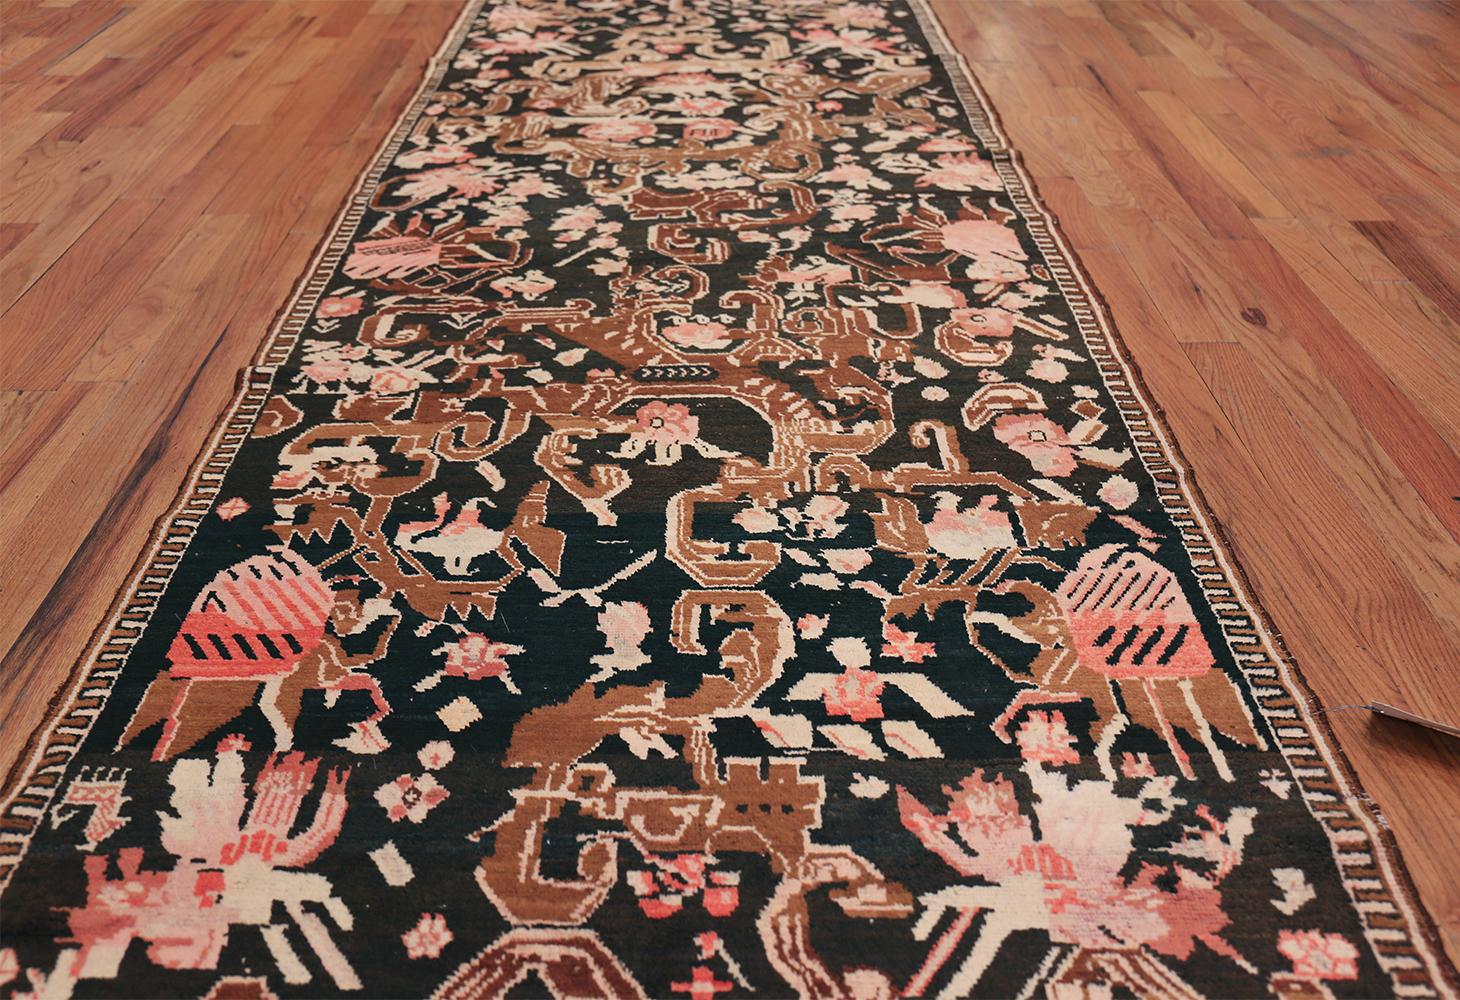 Hand-Knotted Antique Caucasian Karabagh Rug. Size: 4 ft x 14 ft 7 in (1.22 m x 4.44 m)